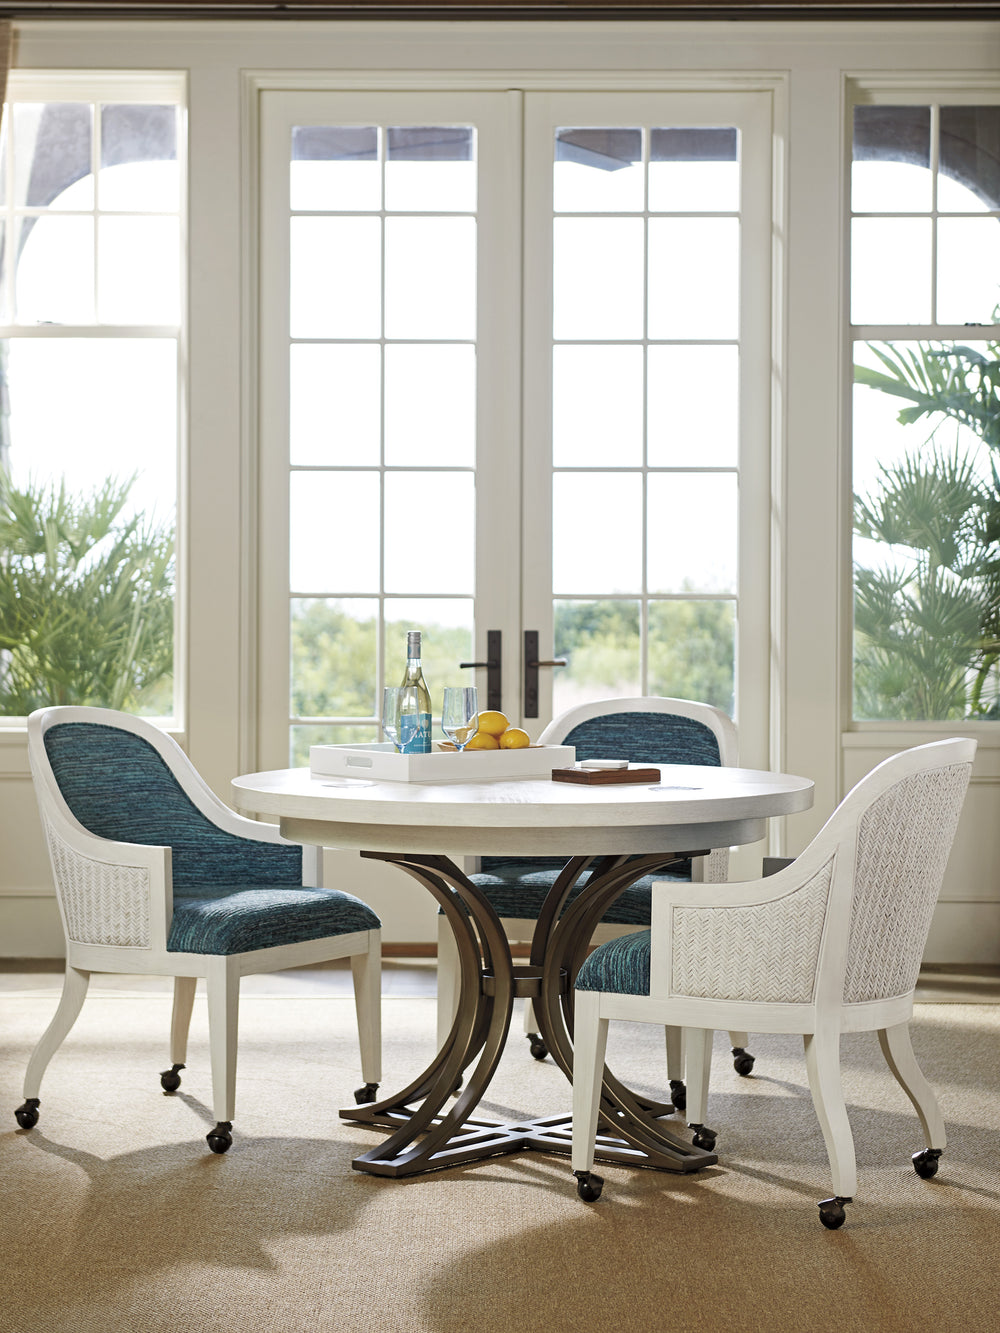 American Home Furniture | Tommy Bahama Home  - Ocean Breeze Marsh Creek Round Dining Table